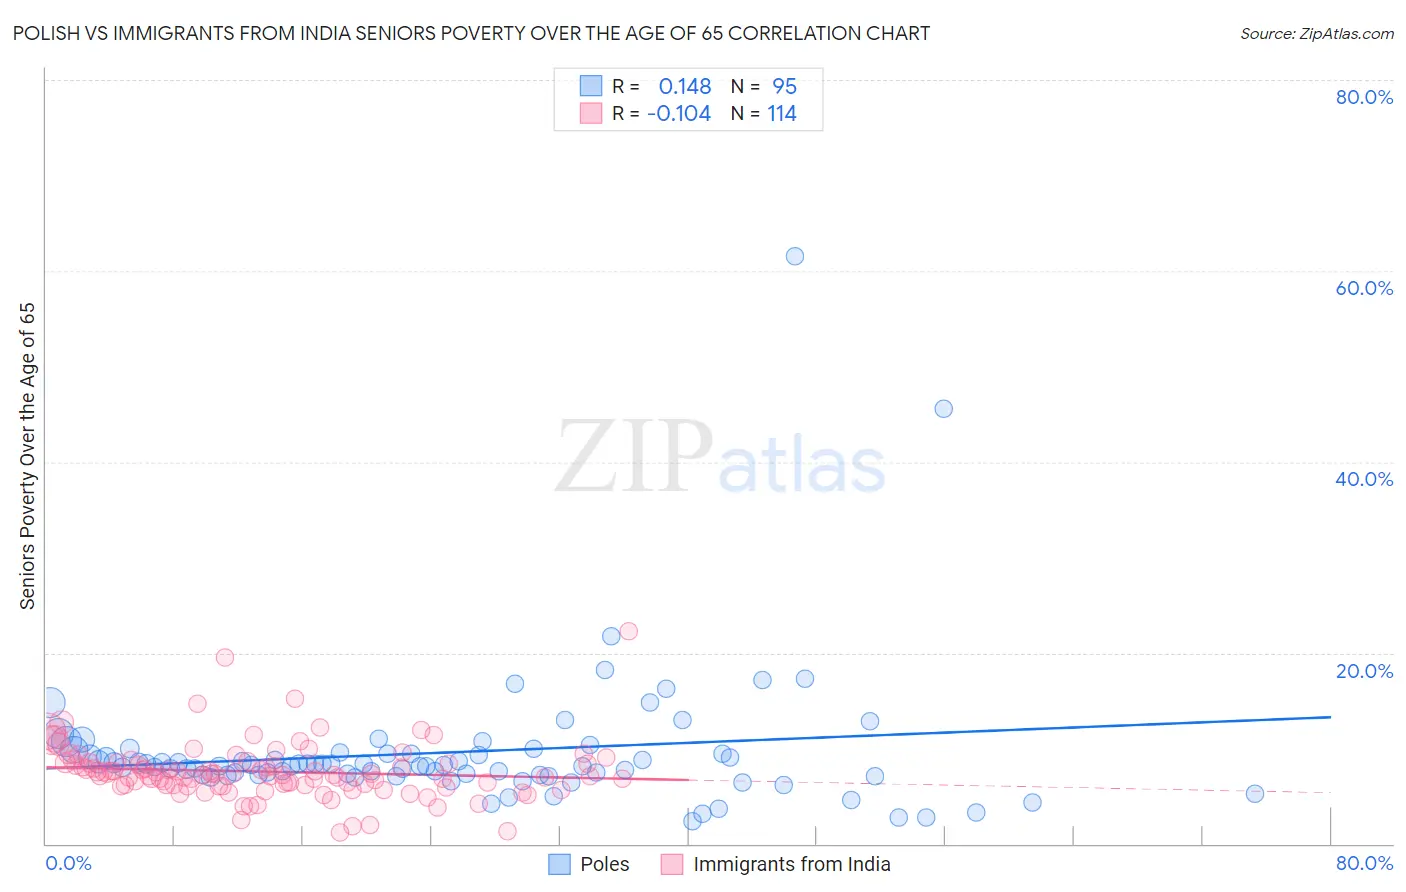 Polish vs Immigrants from India Seniors Poverty Over the Age of 65